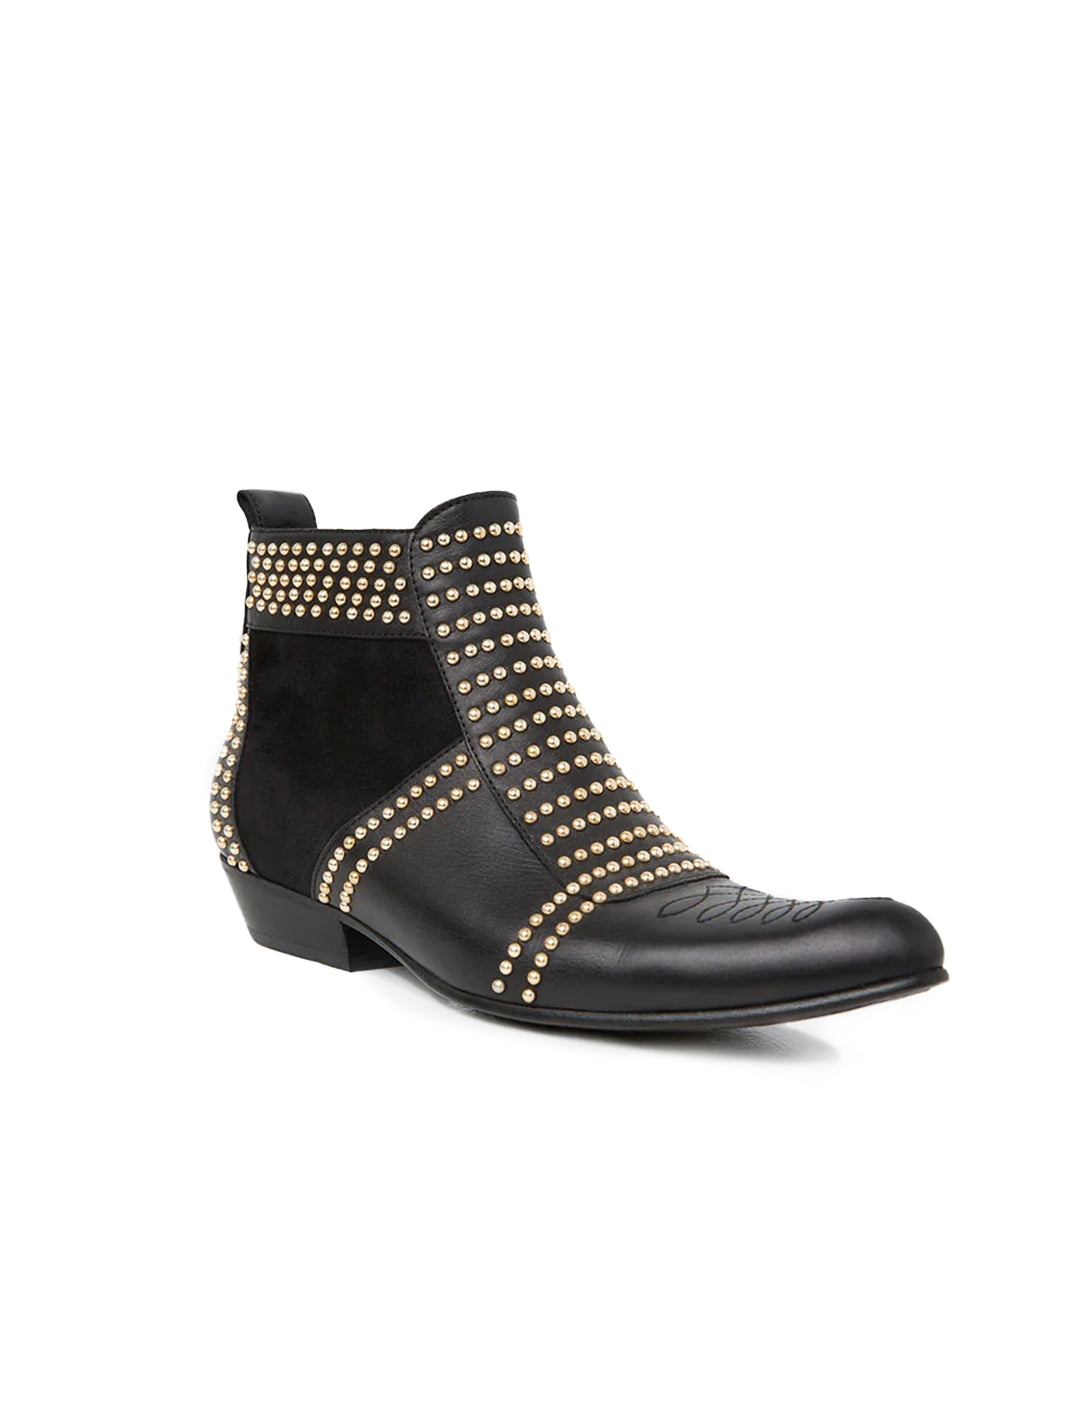 Front angle view of Anine Bing's charlie boots with gold studs.